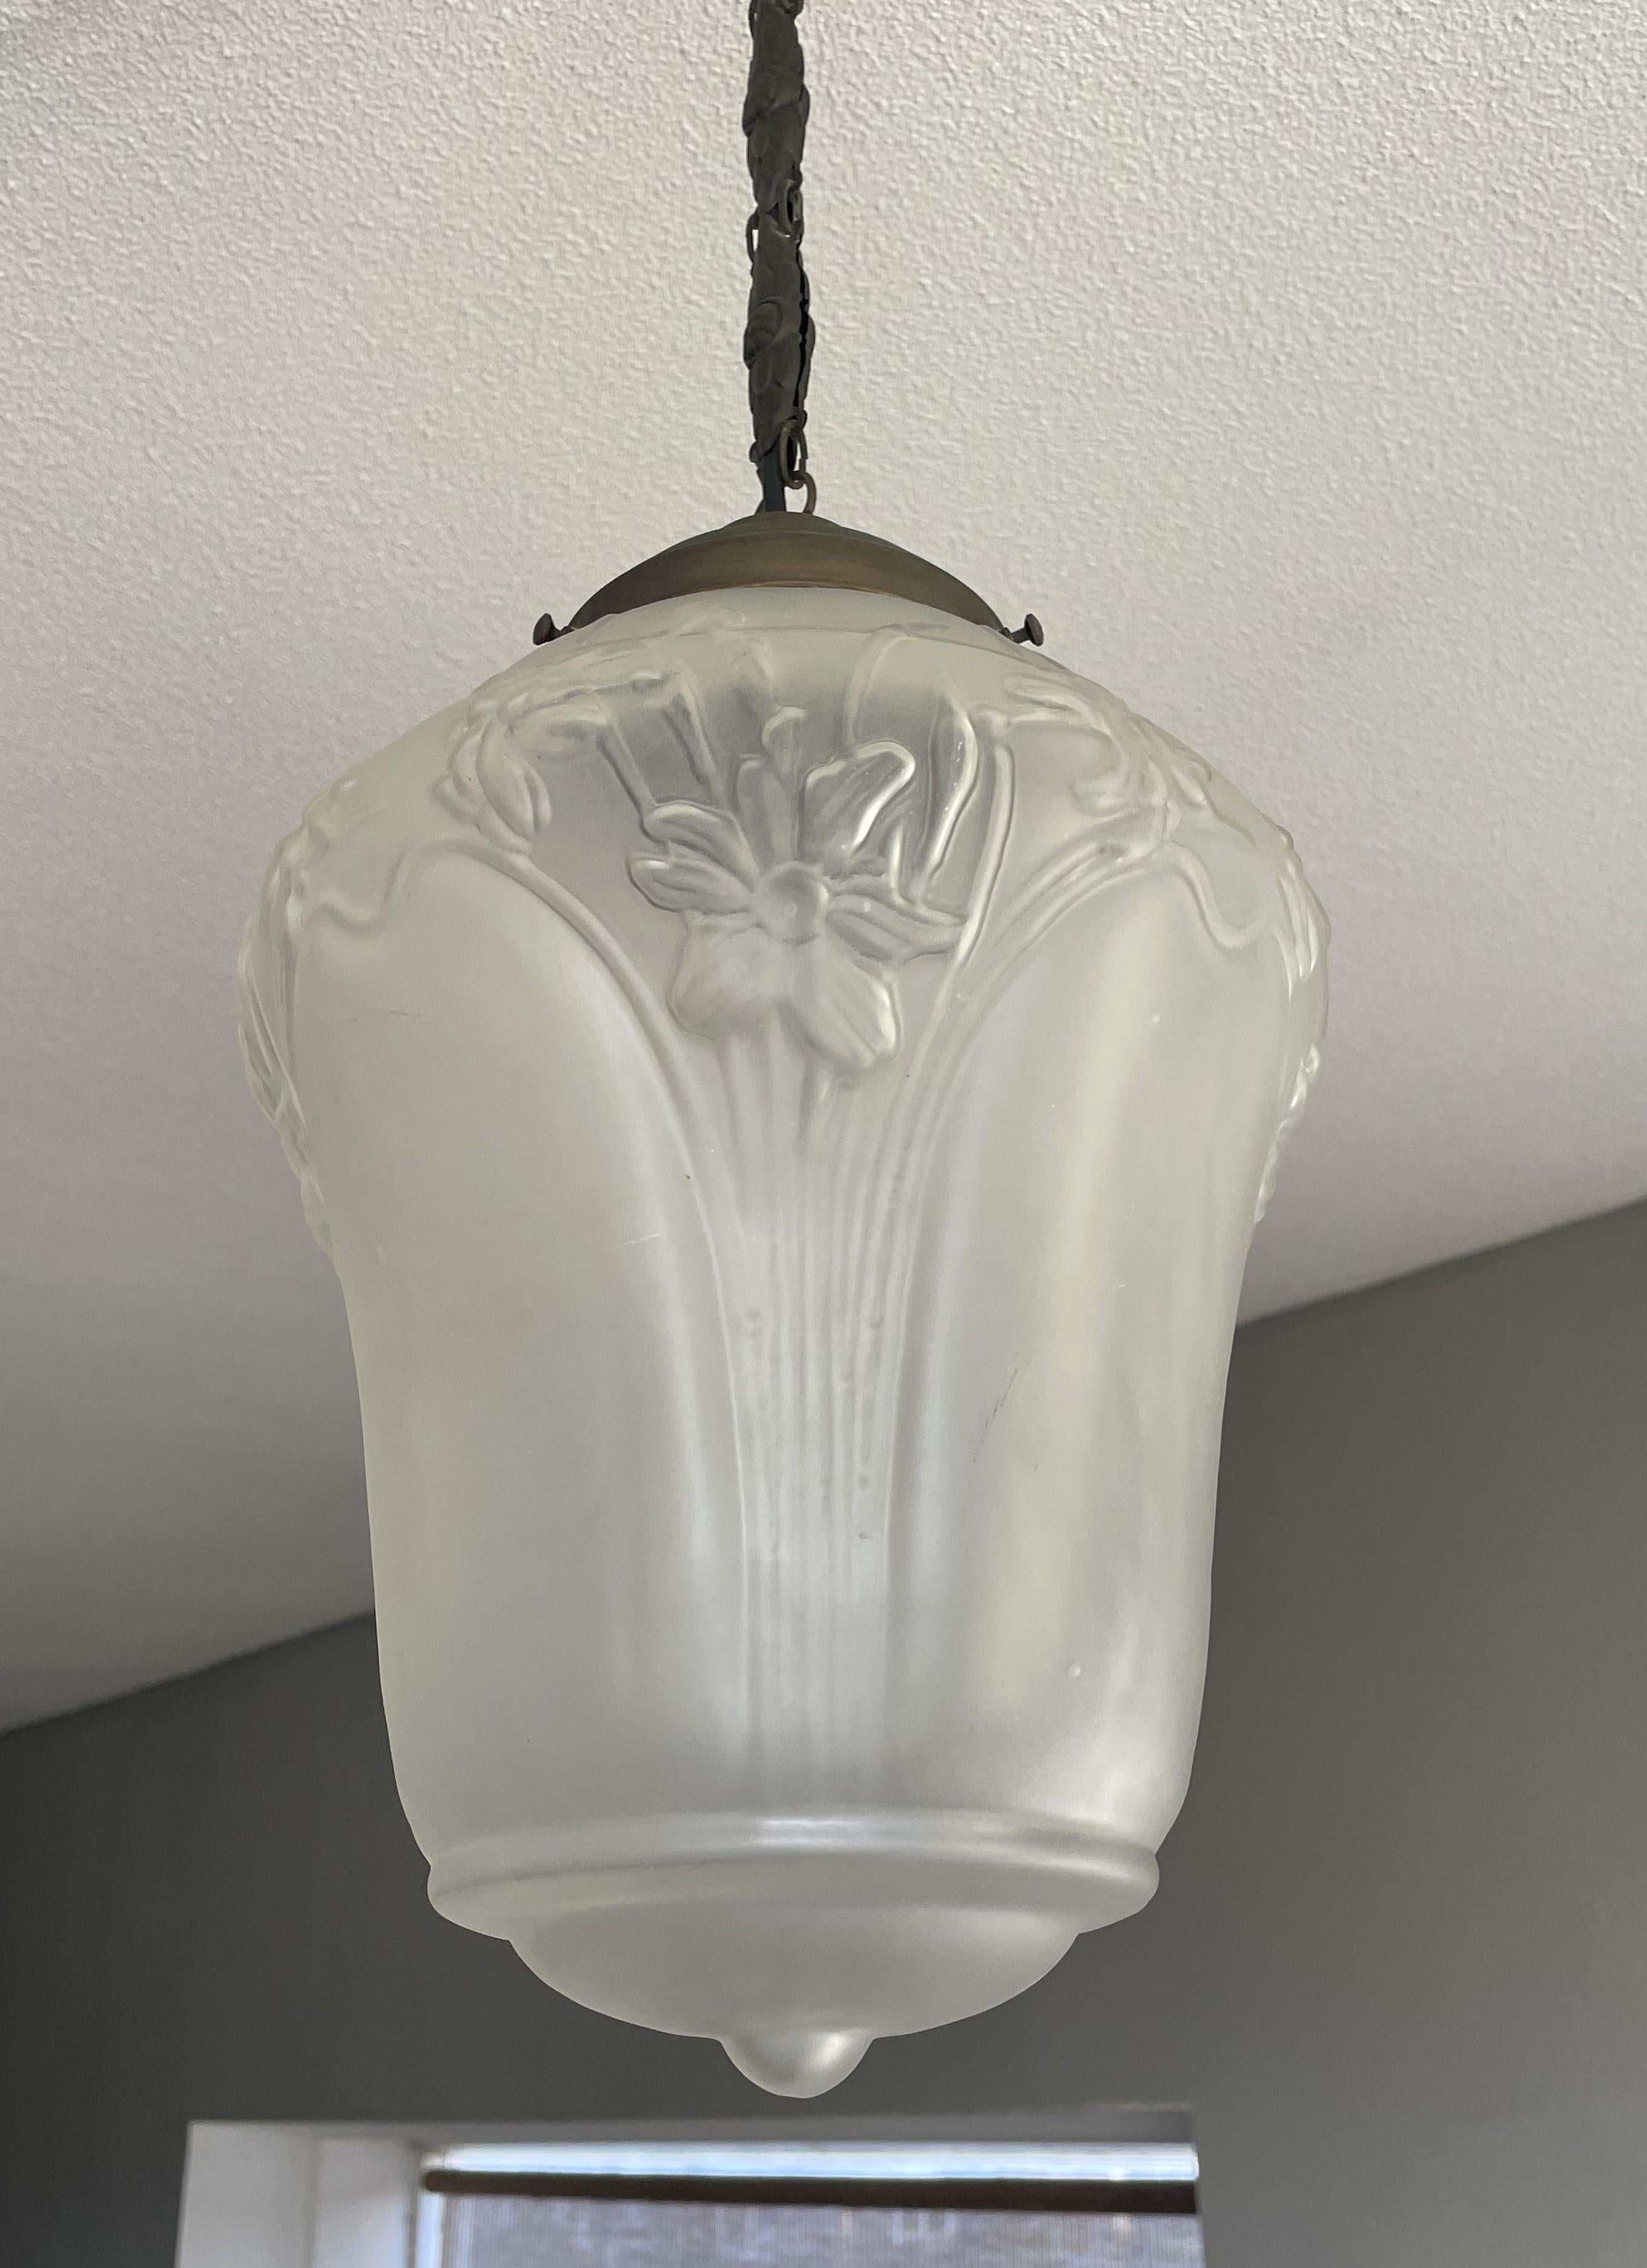 20th Century Original Arts and Crafts Glass Hallway Pendant Light with Daffodil Flowers 1900s For Sale